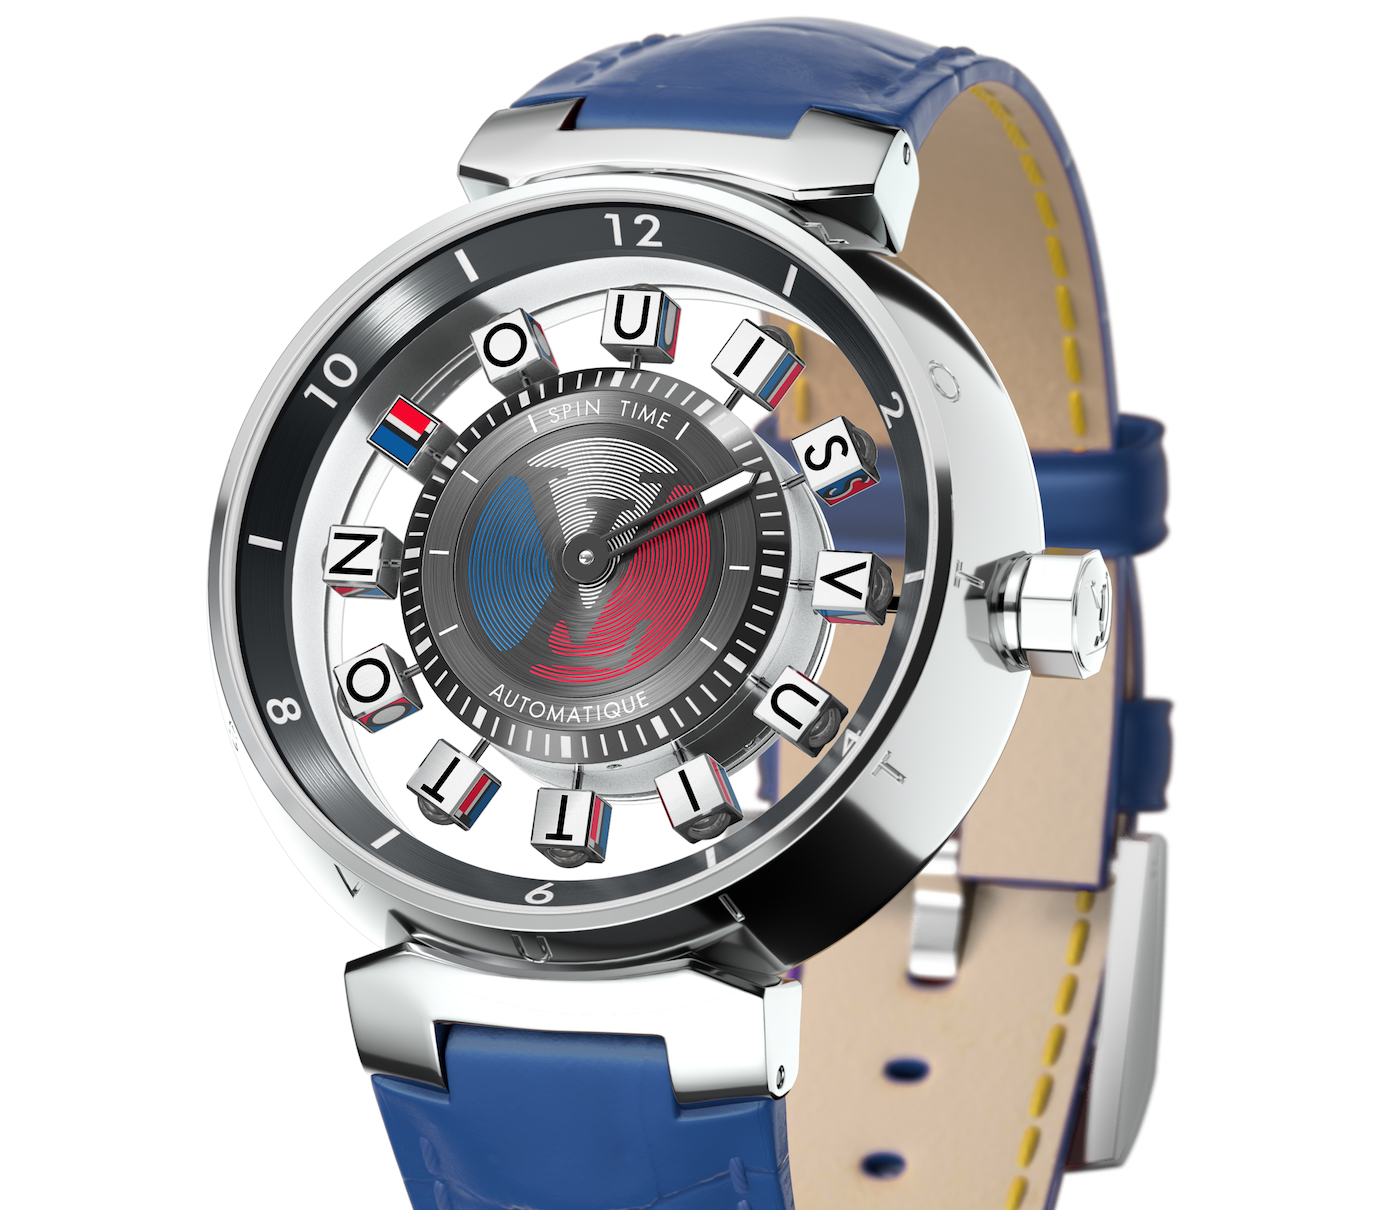 Louis-Vuitton-Tambour-Spin-Time-Air-Watch-Full-View